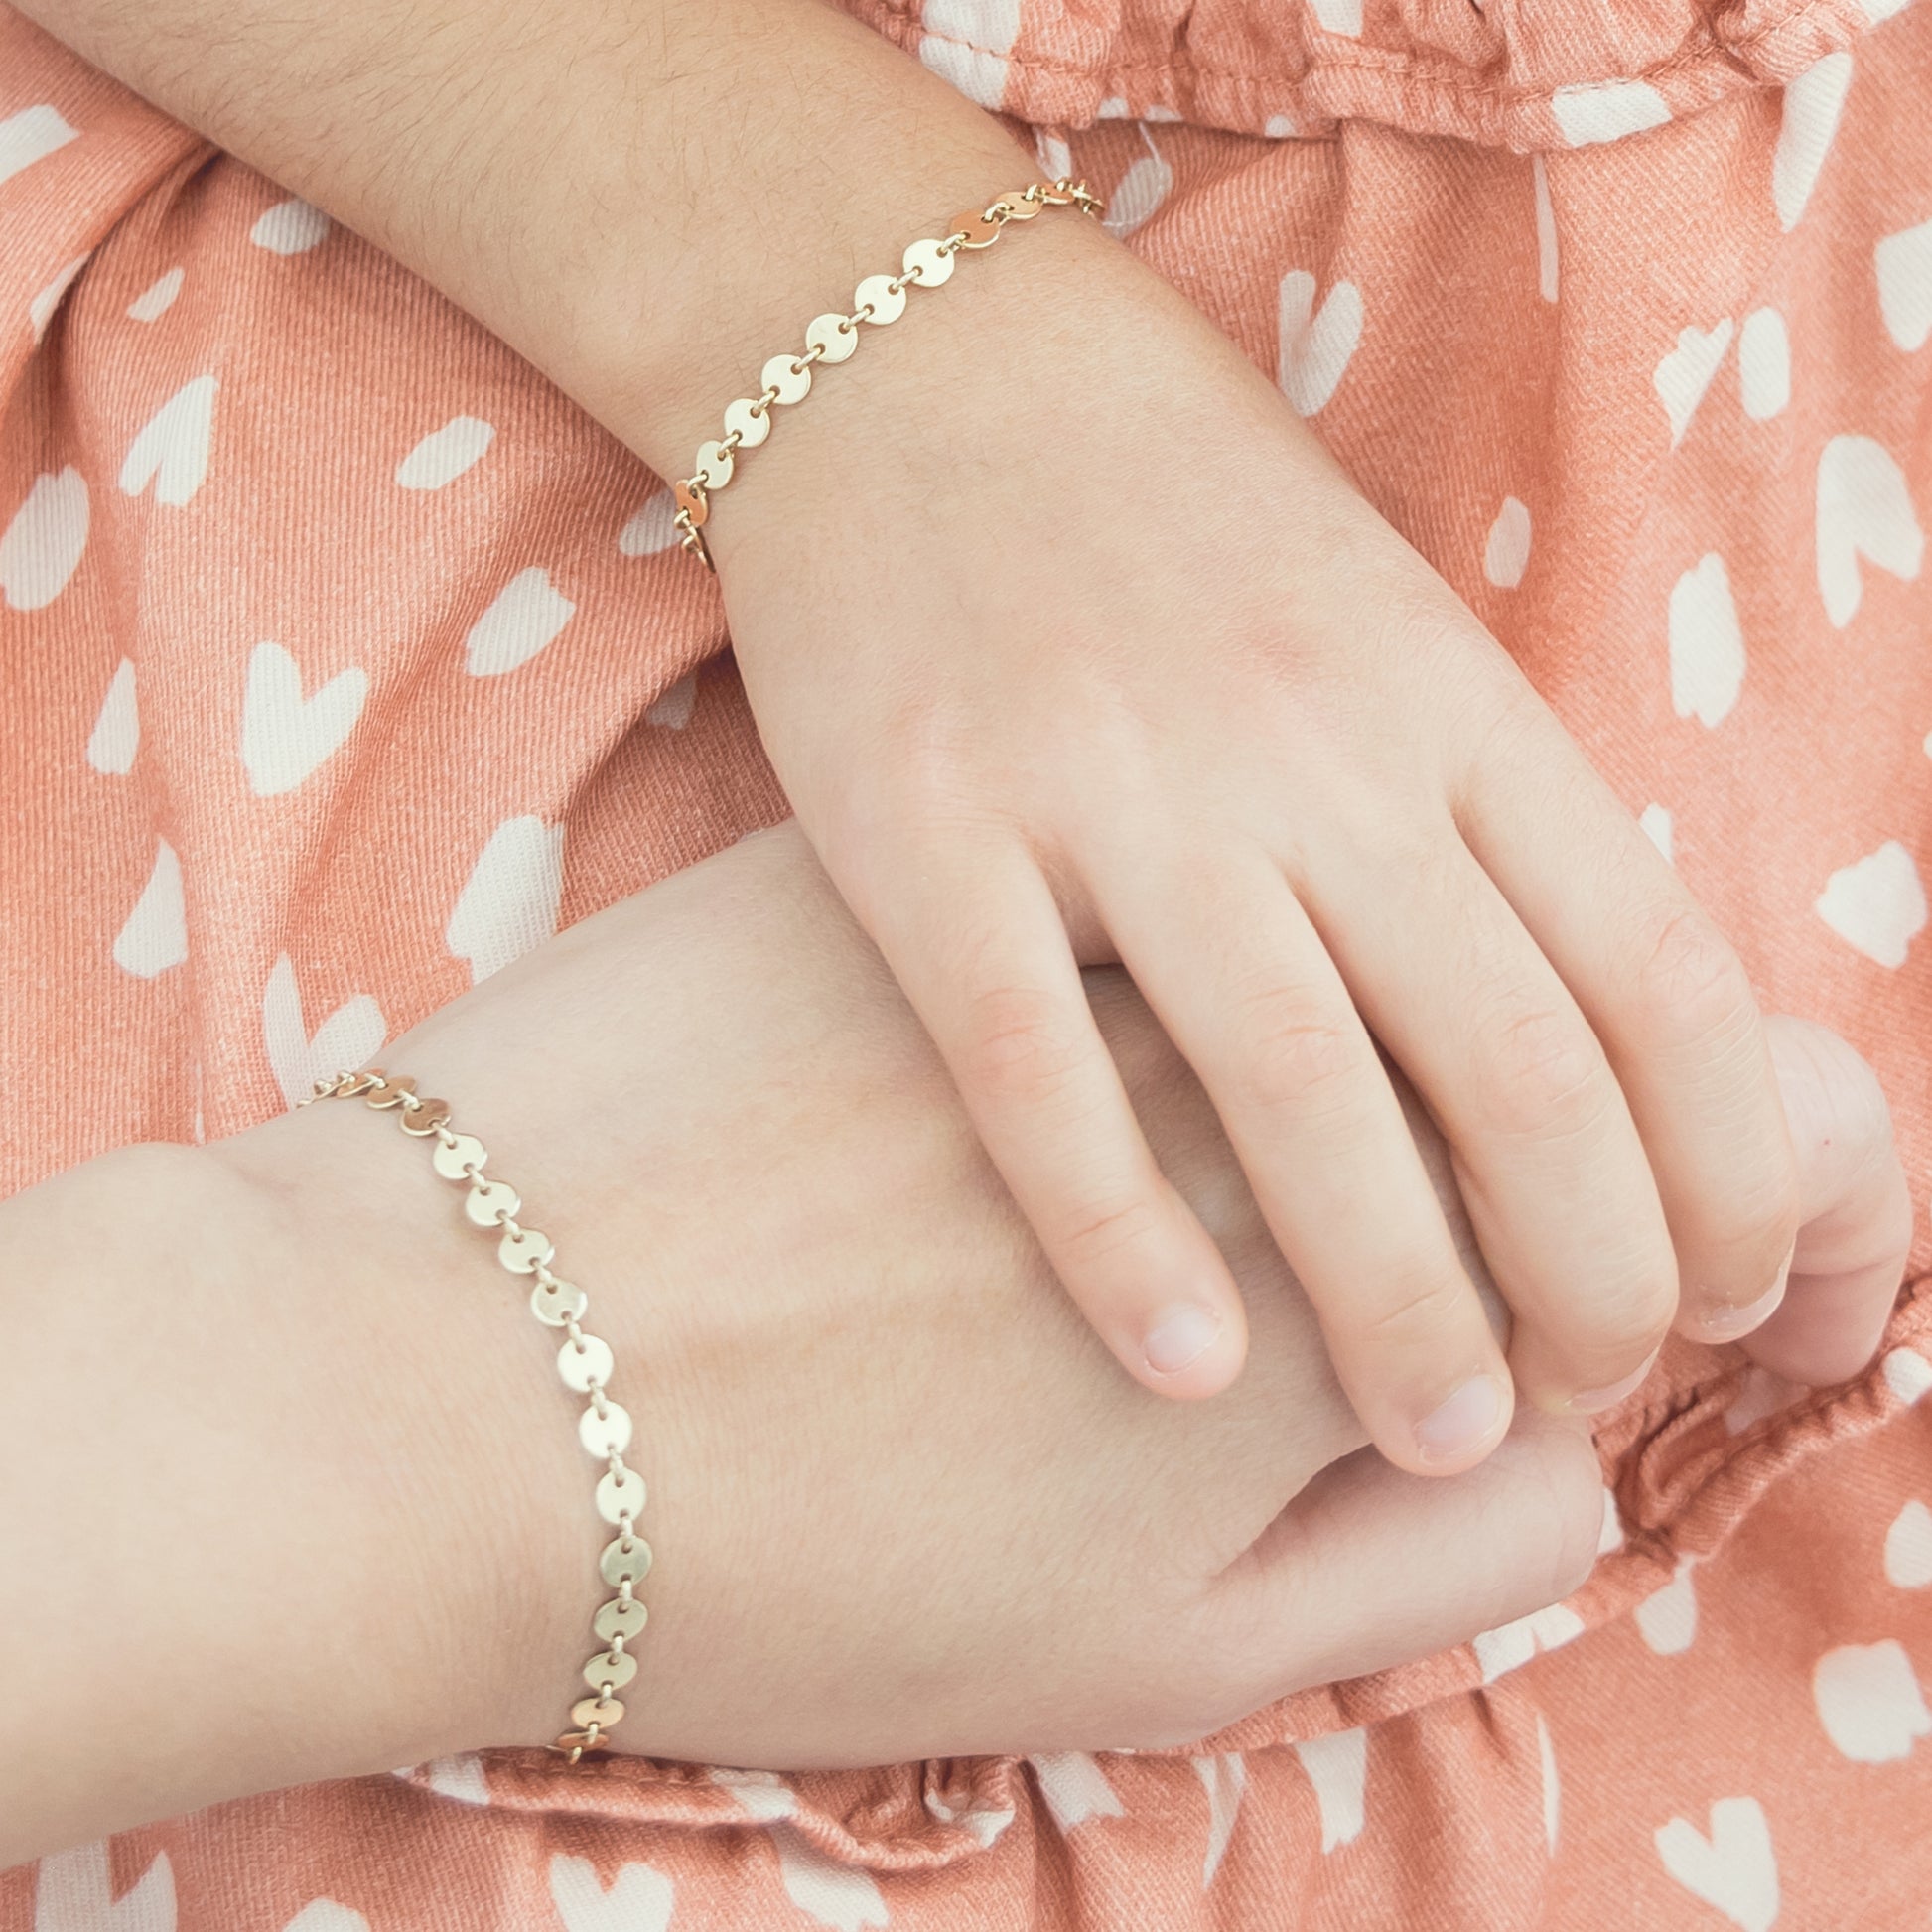 Disc chain bracelet with 1/2" extension in 14k gold-fill on adult and child model